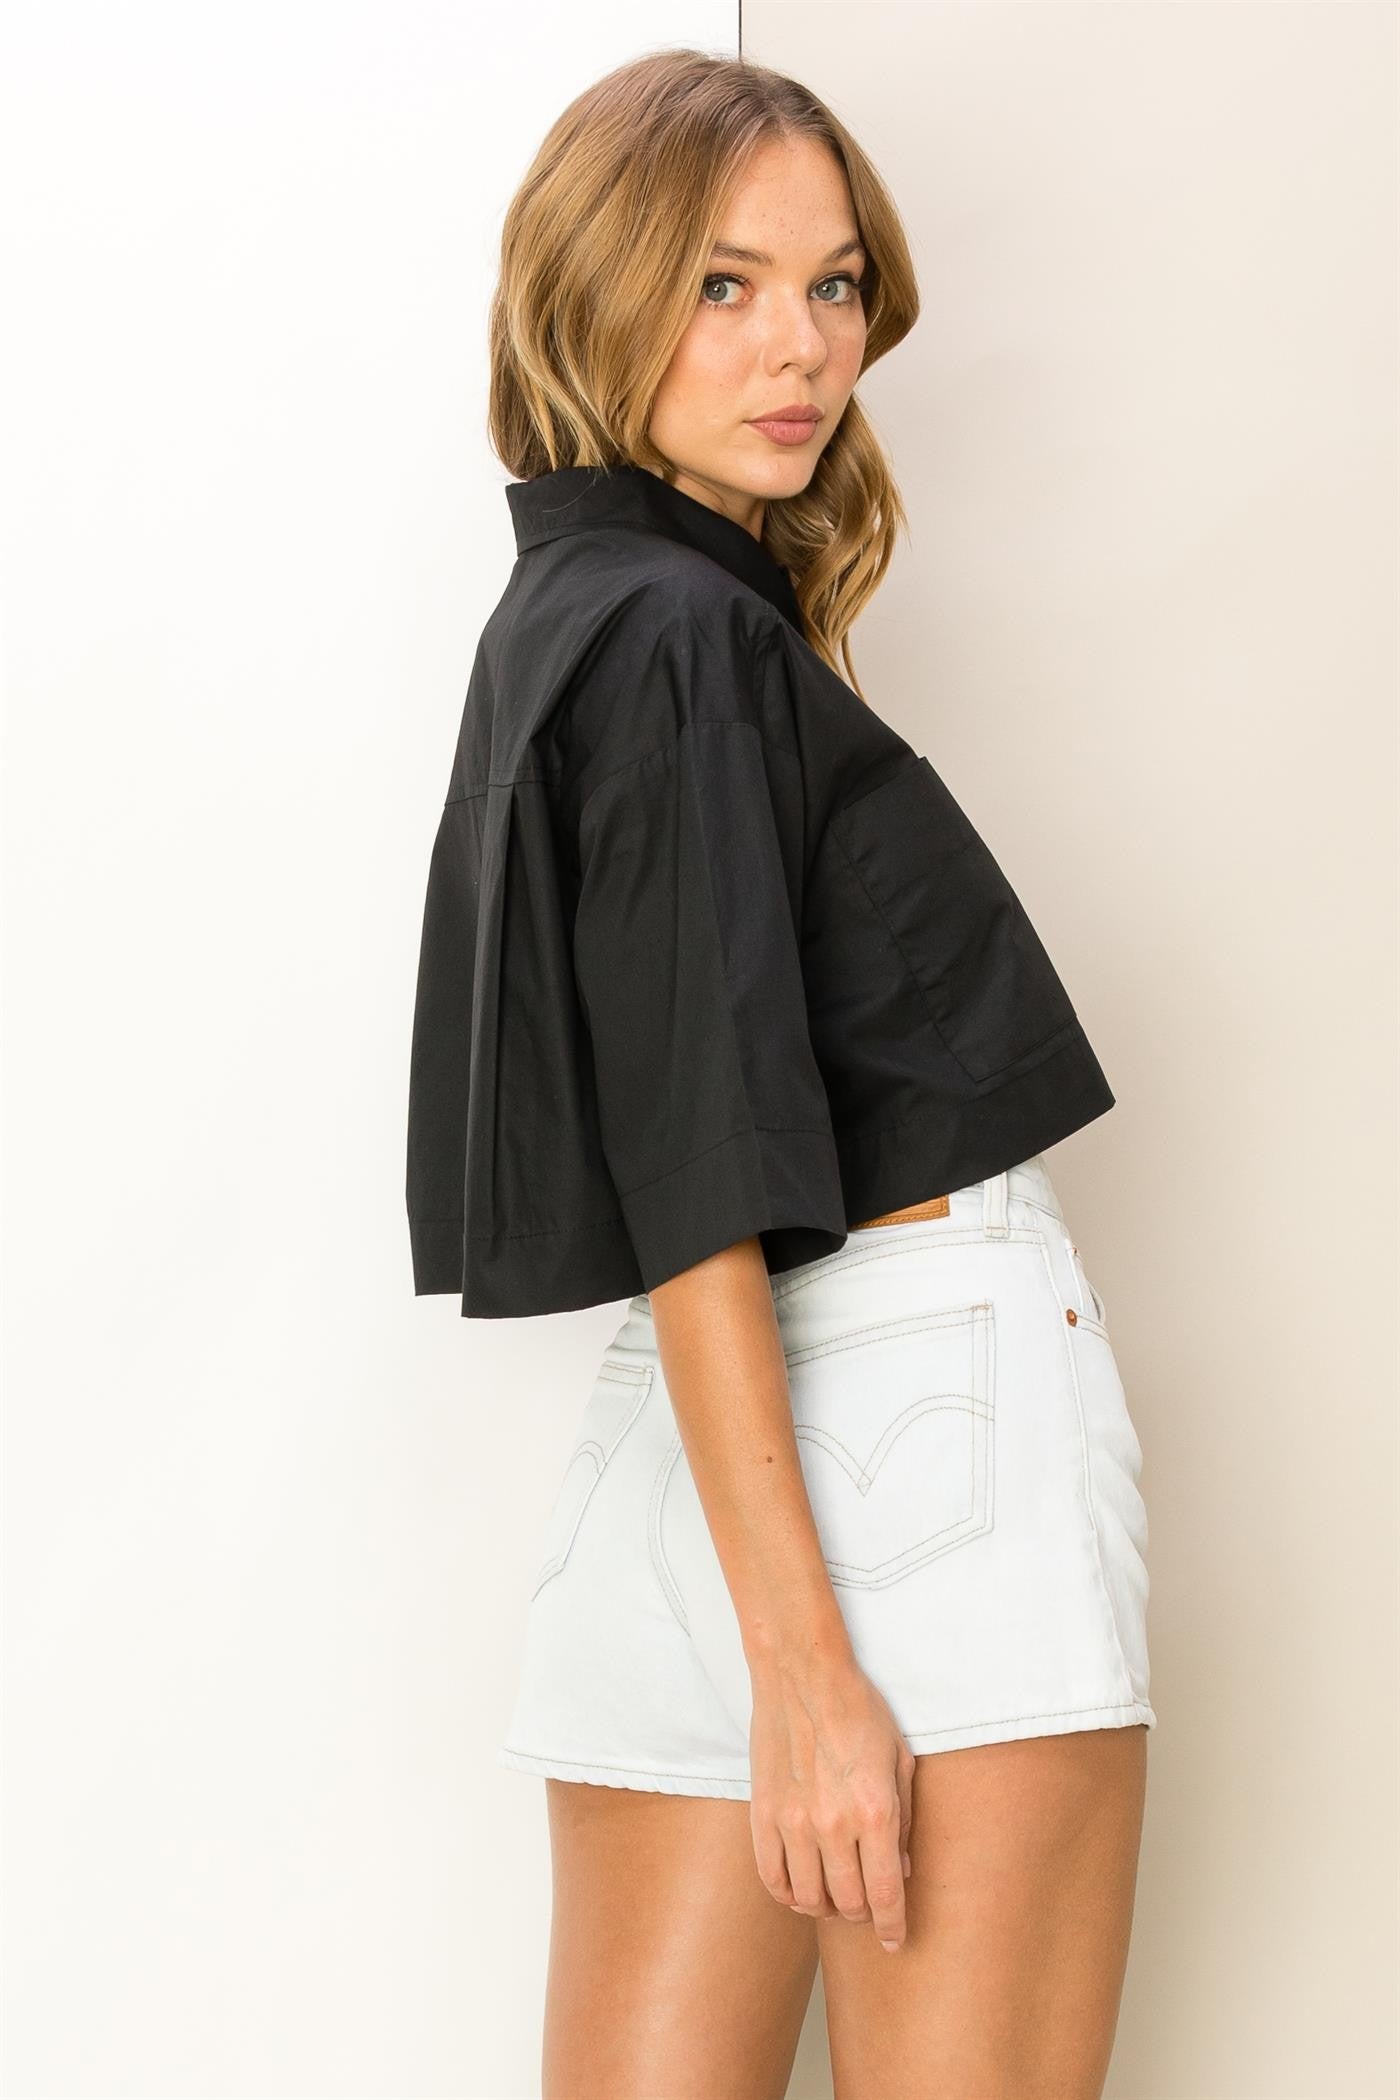 Go Getter Cropped Button Down Top